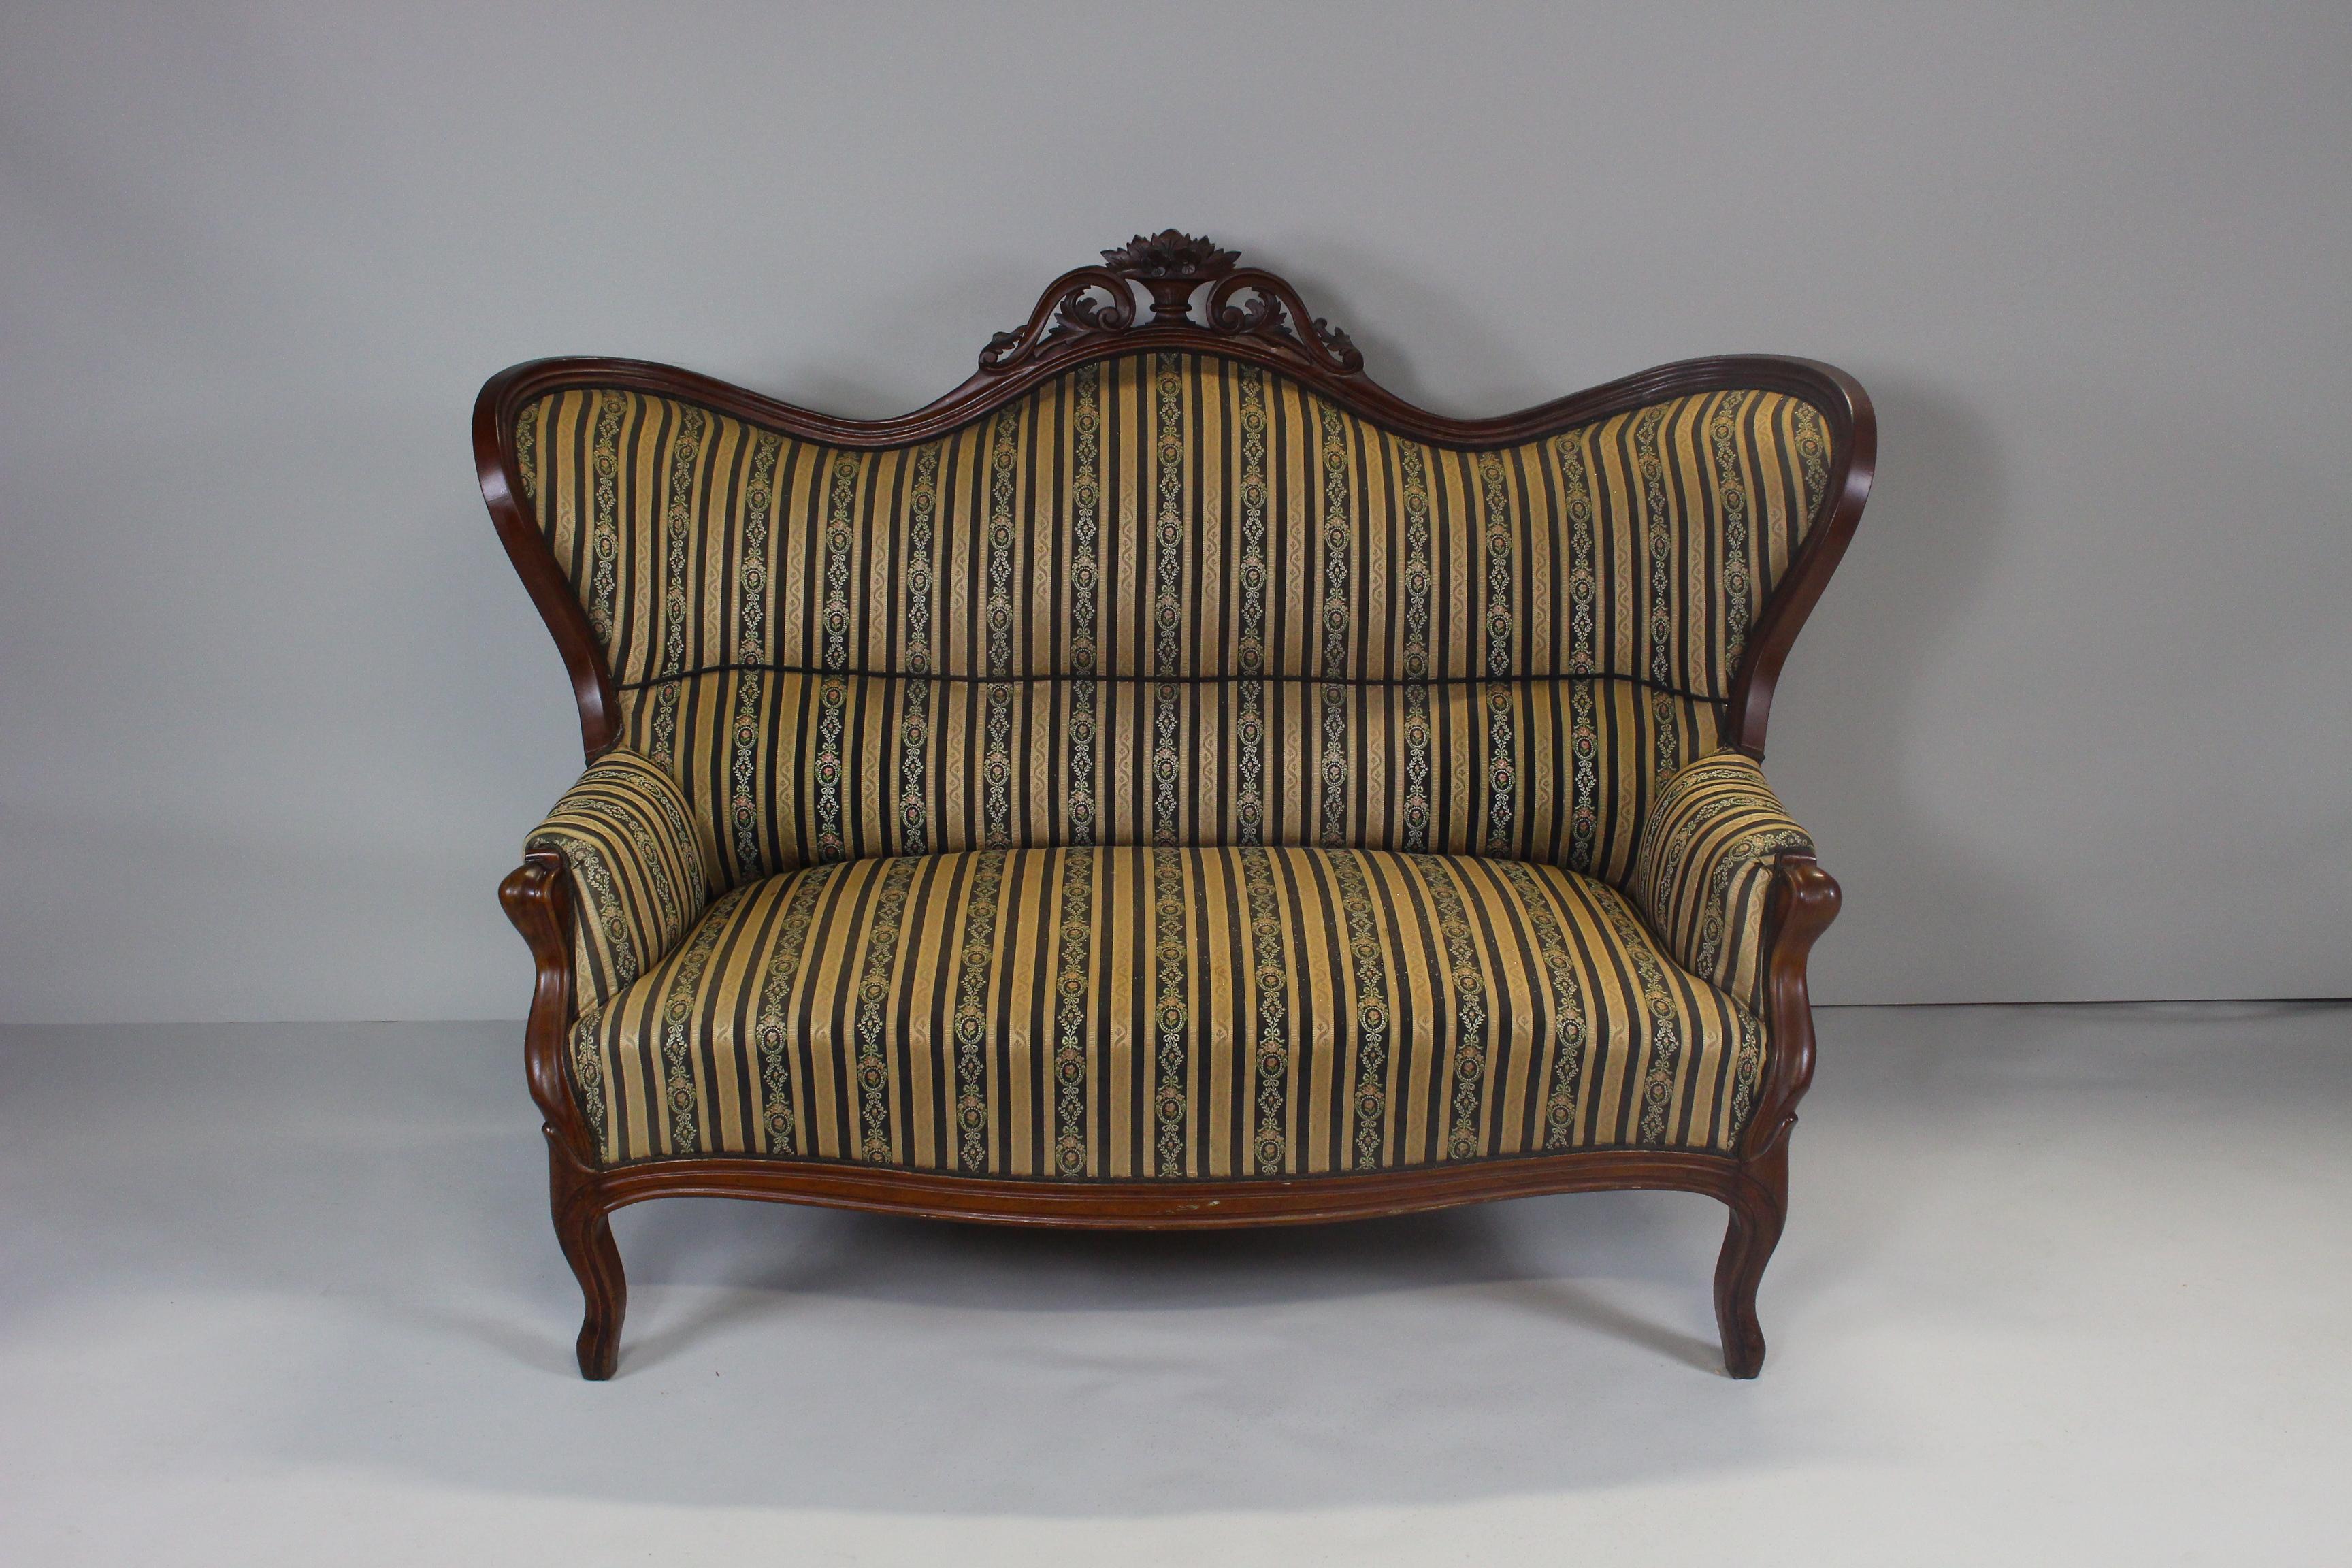 Beautiful carved rococo sofa from the late 19th century.
Seat made of belts and springs, upholstery in very good condition.
Stable construction, mahogany wood.
 